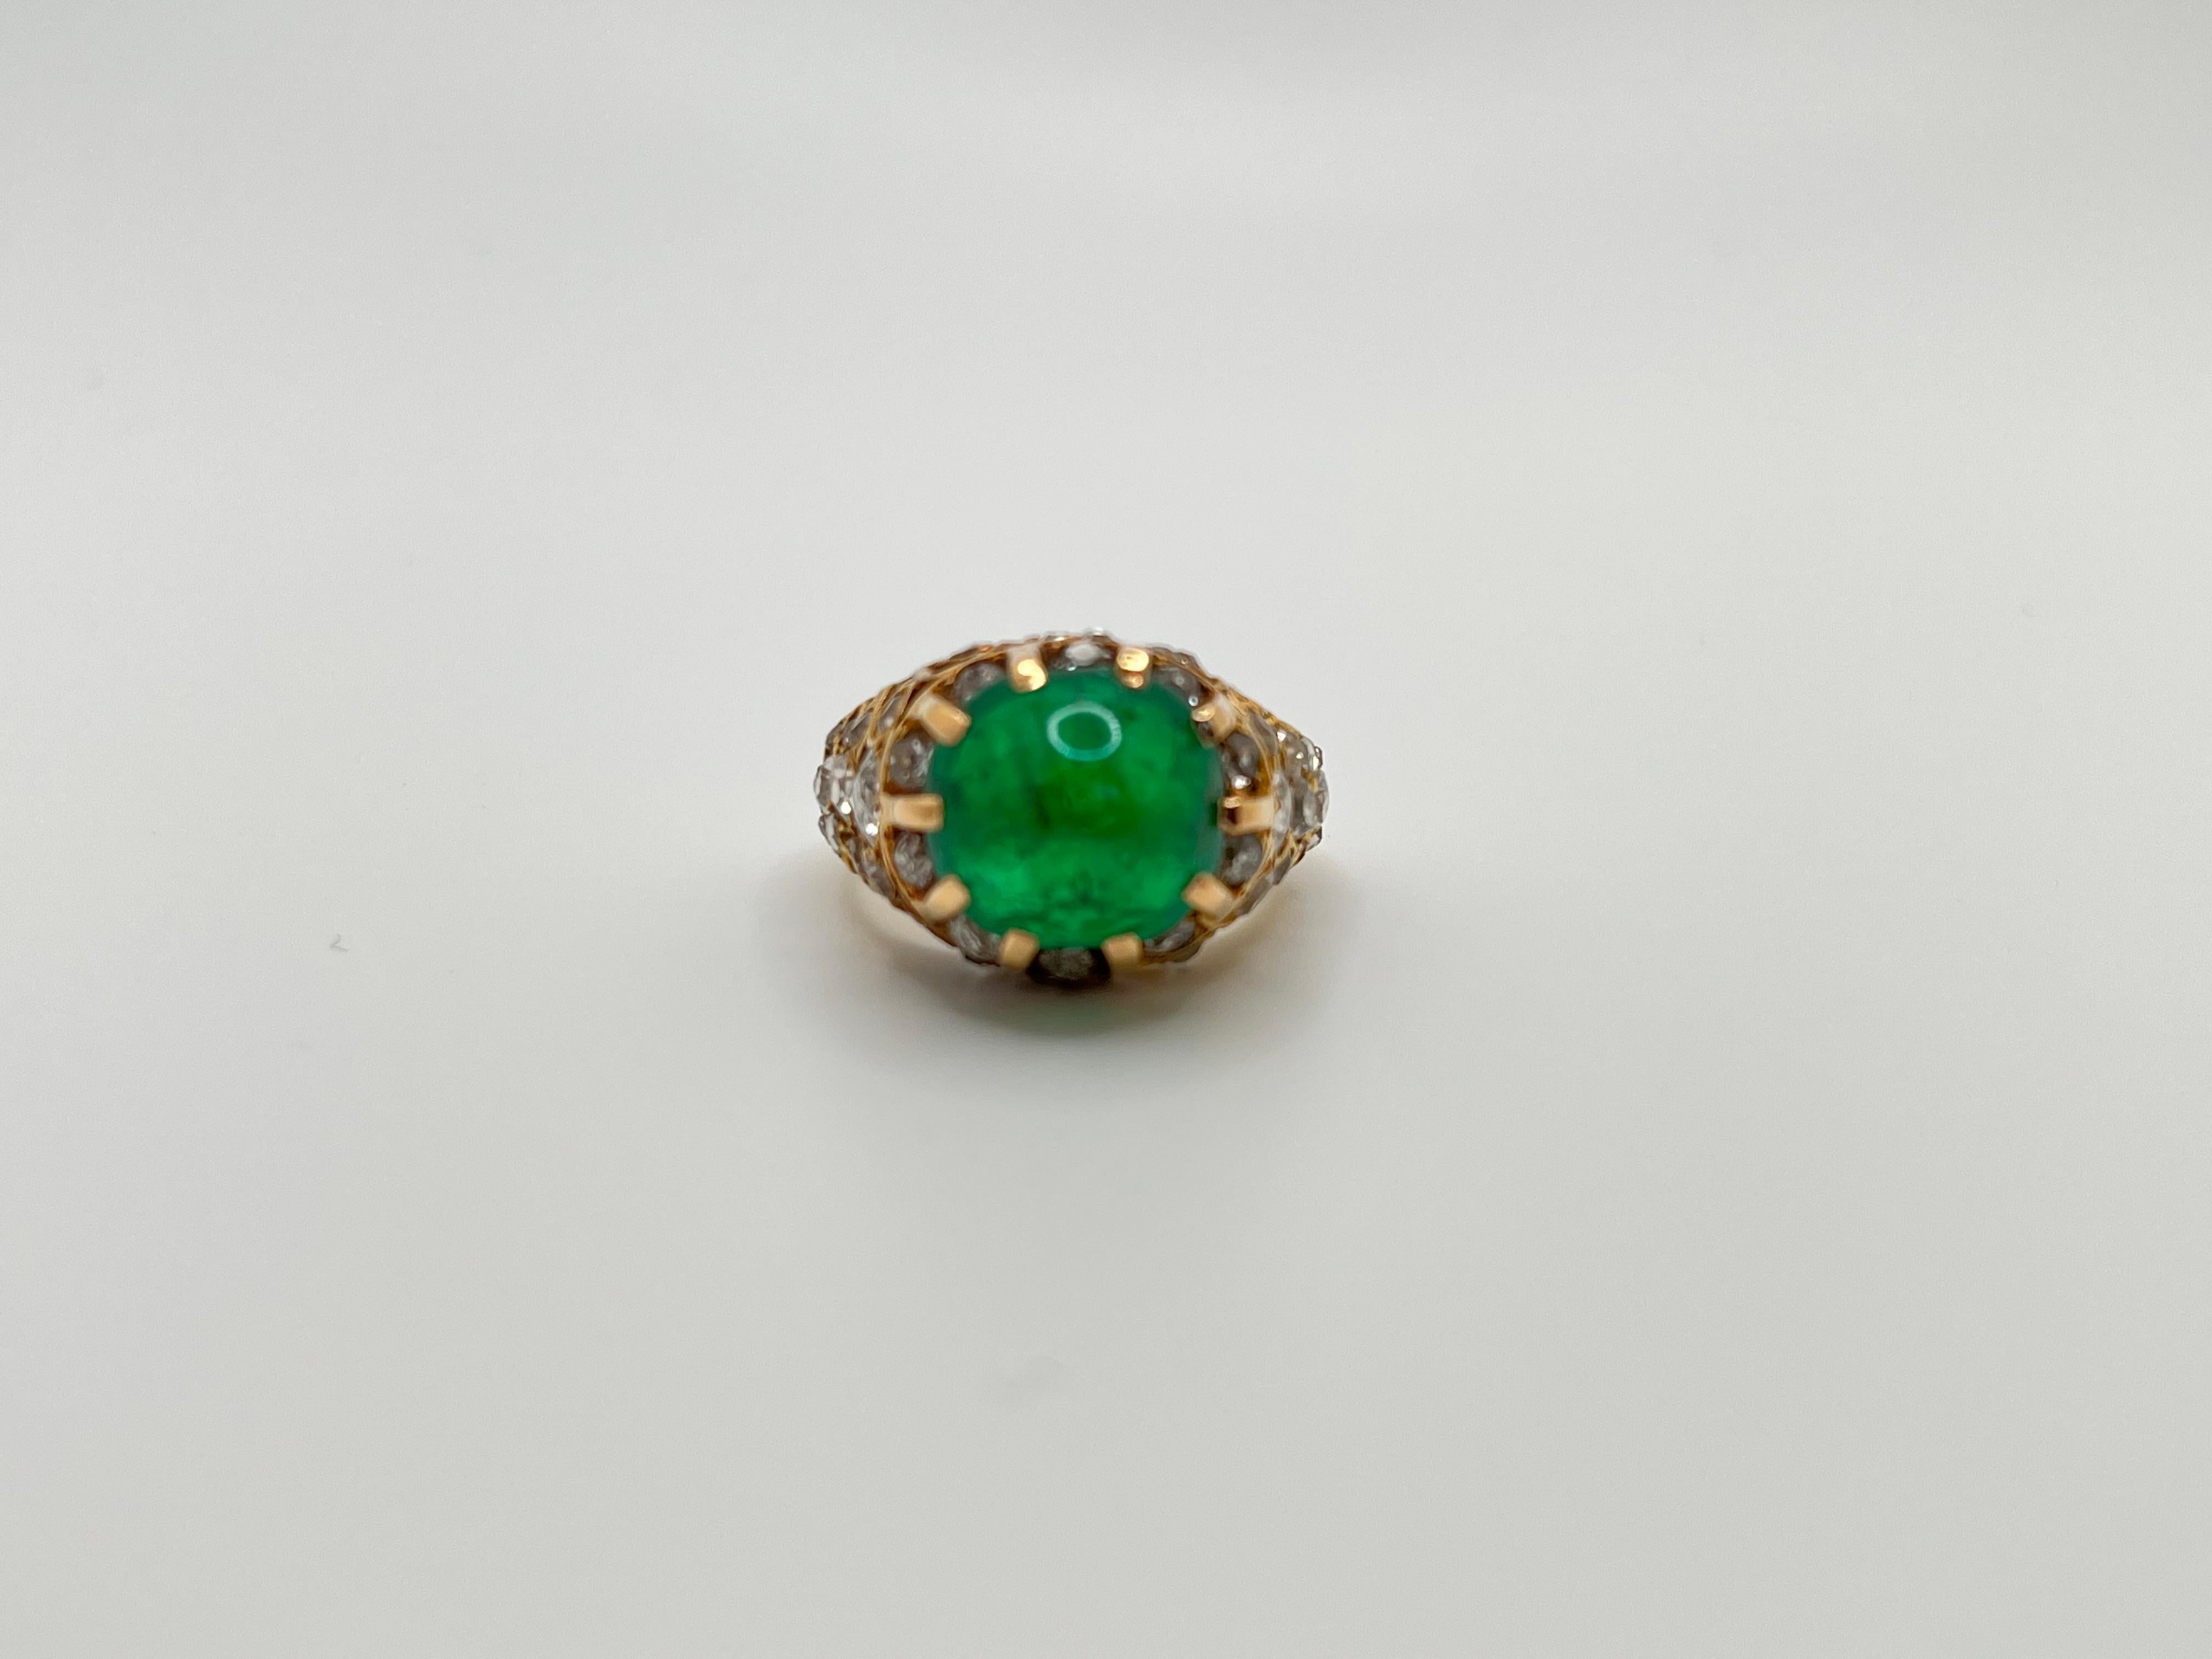 This exquisite cabochon emerald and diamond ring is hand-crafted in 18 karat yellow gold and is a product of the 1940s French jewelry craftsmanship. The centerpiece of the ring is a stunning cabochon emerald, surrounded by sparkling old mine cut